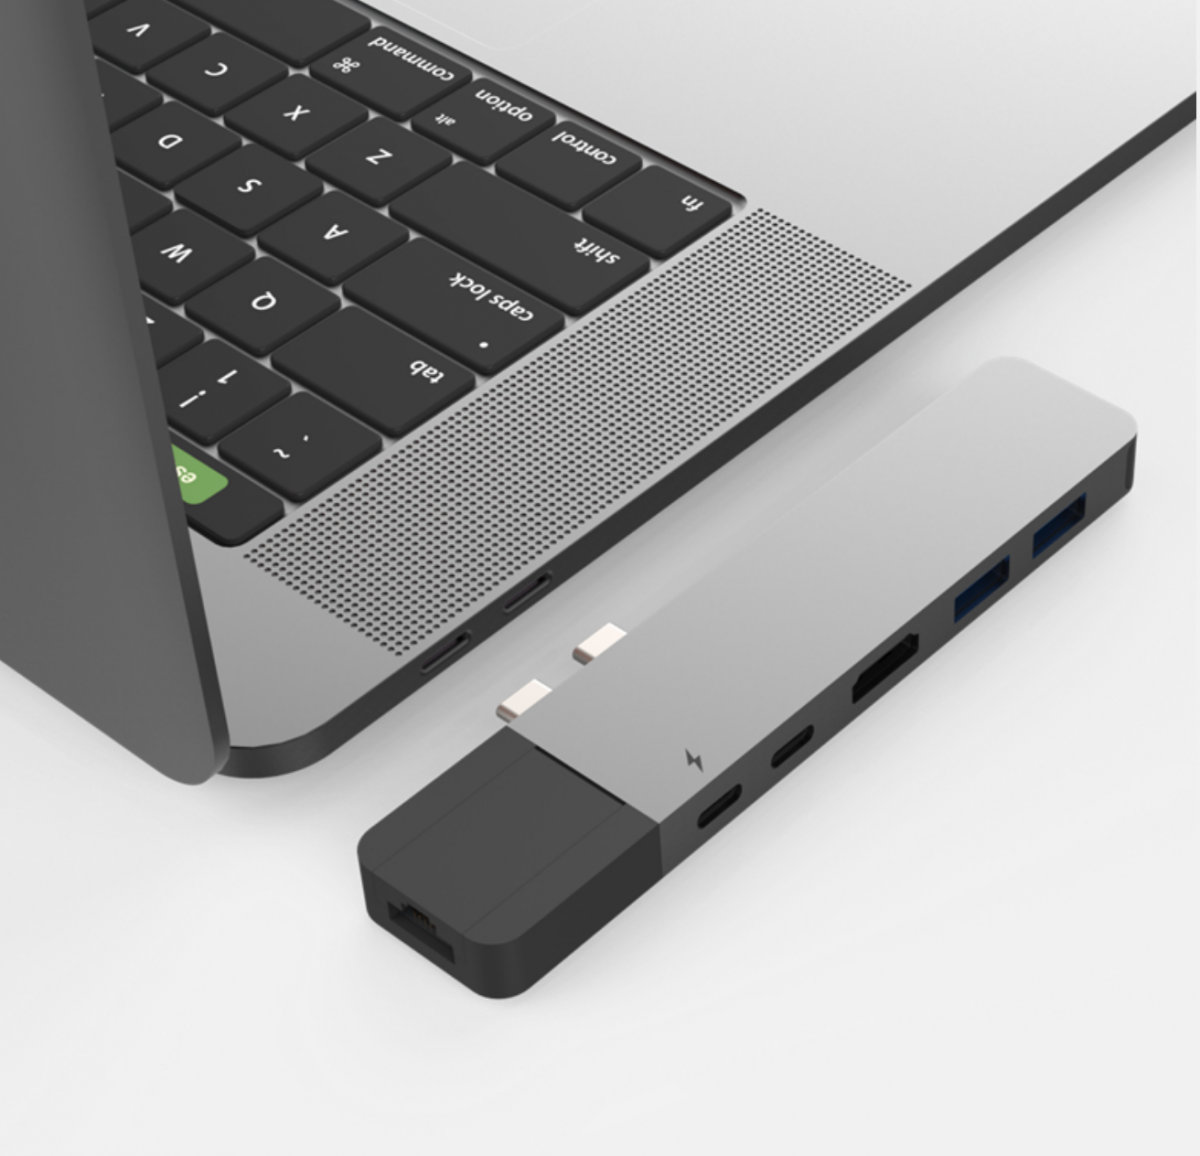 HyperDrive NET 6 in 2 hub pictured where USB-C slot is located on MacBook Pro